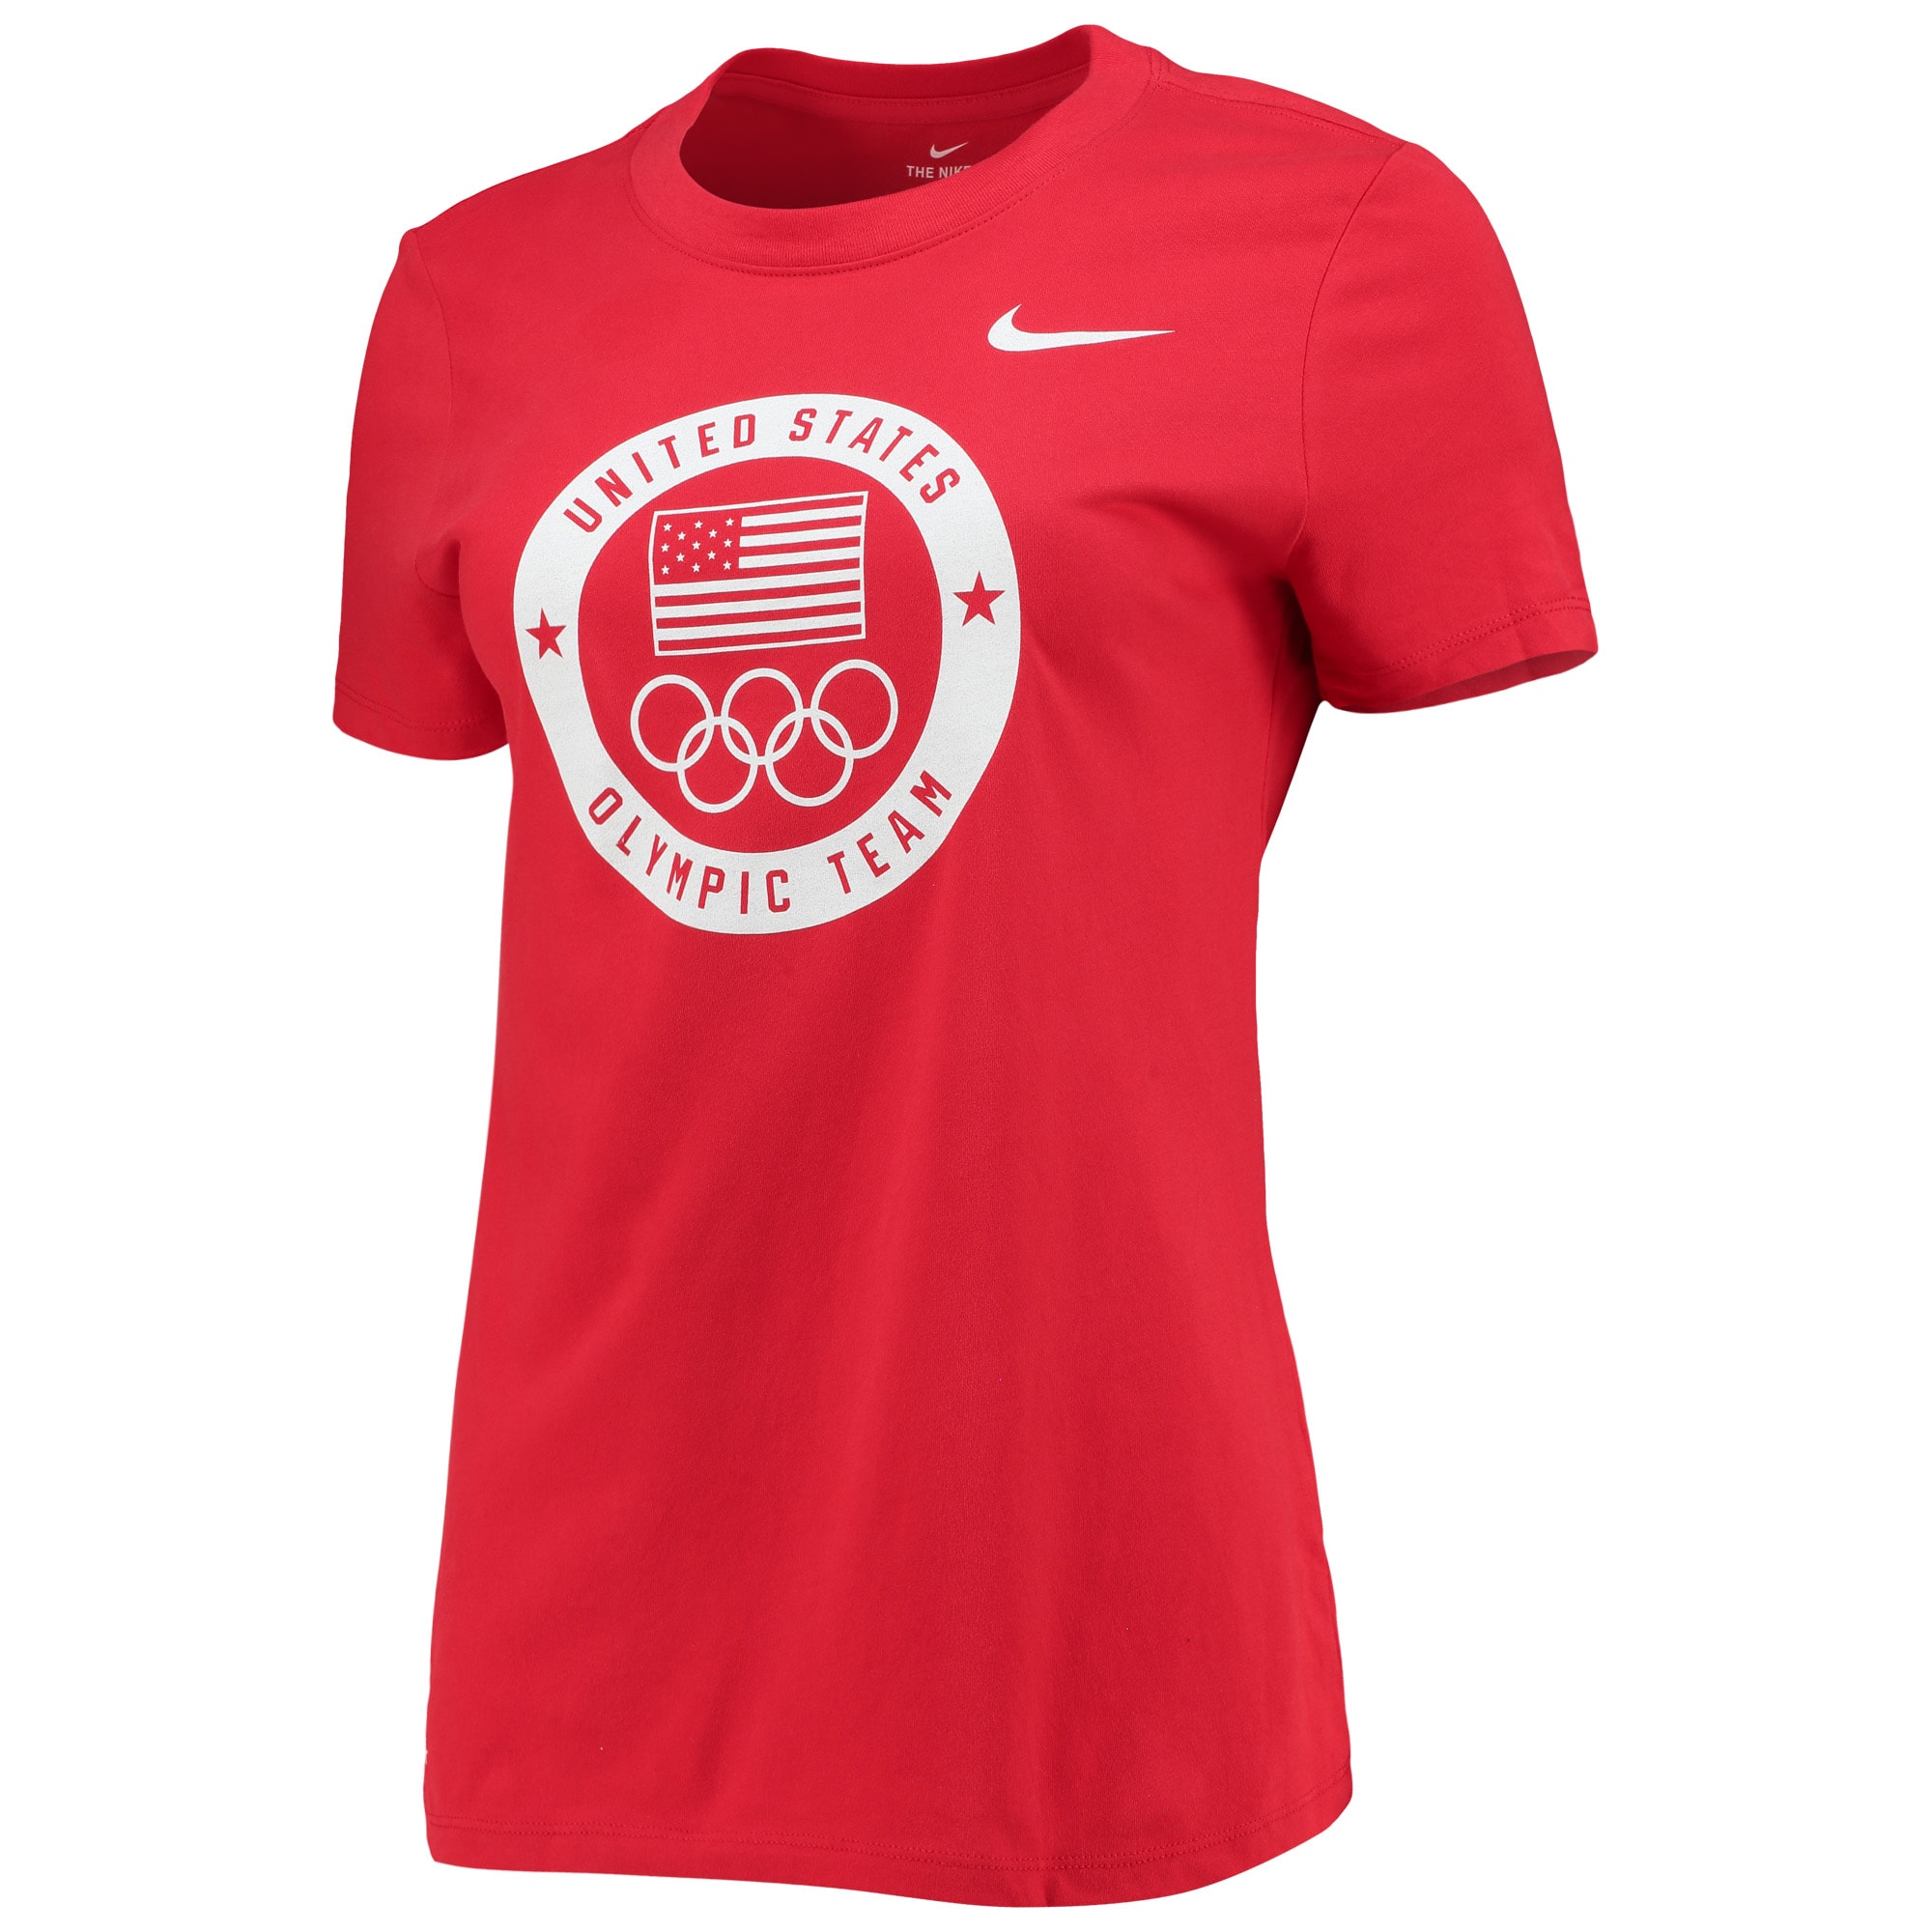 Women's Nike Red Team USA Performance T-Shirt - image 2 of 3